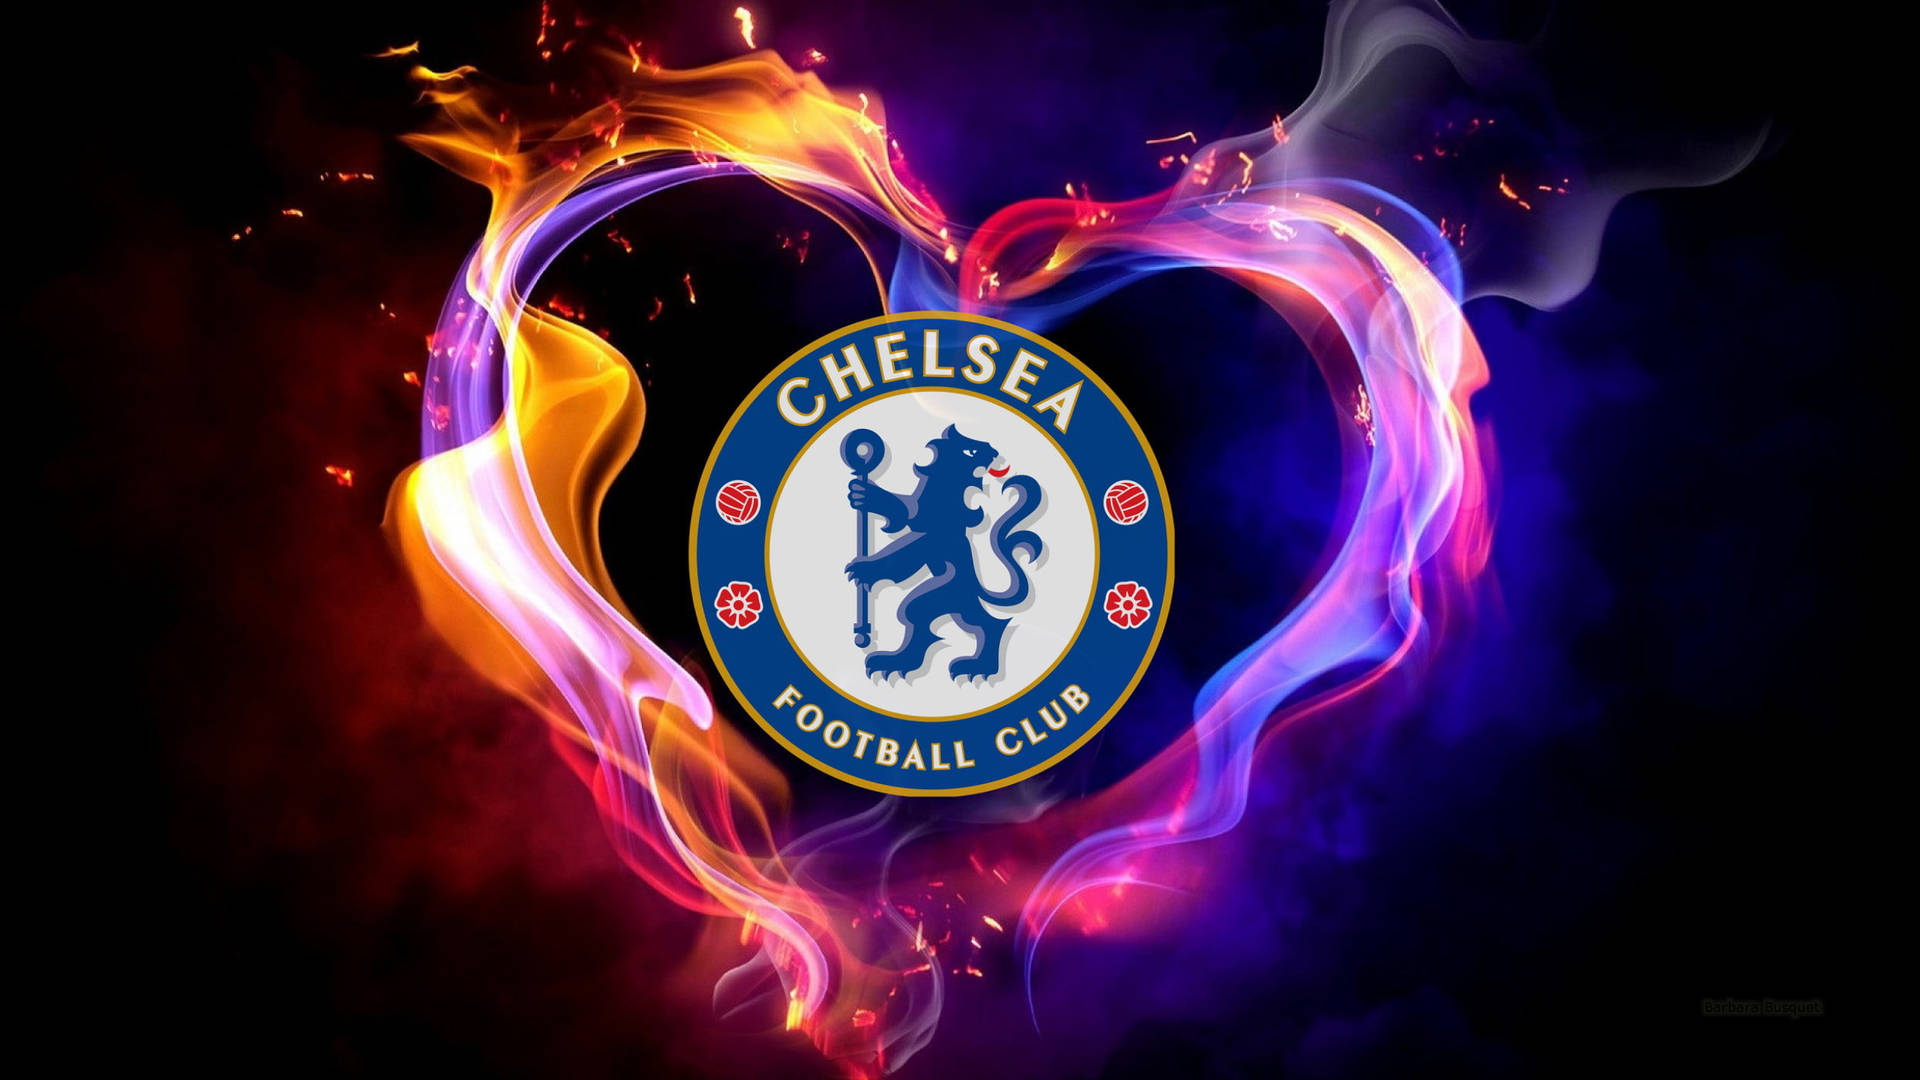 Chelsea HD Wallpapers 1080p 75 images